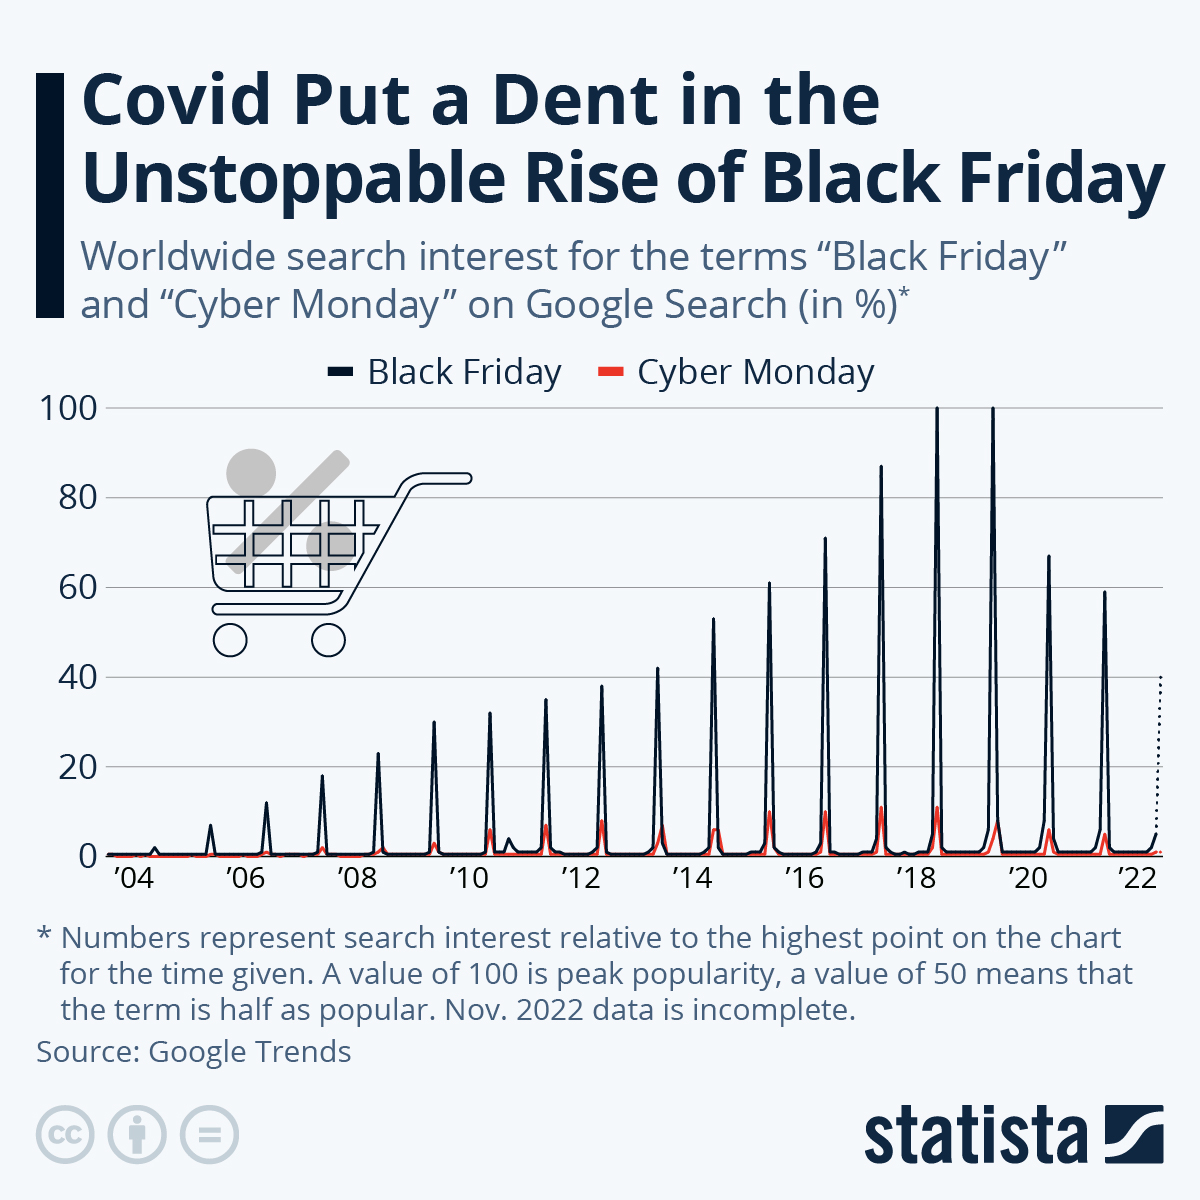 The Unstoppable Rise of Black Friday goes down due to Covid-19